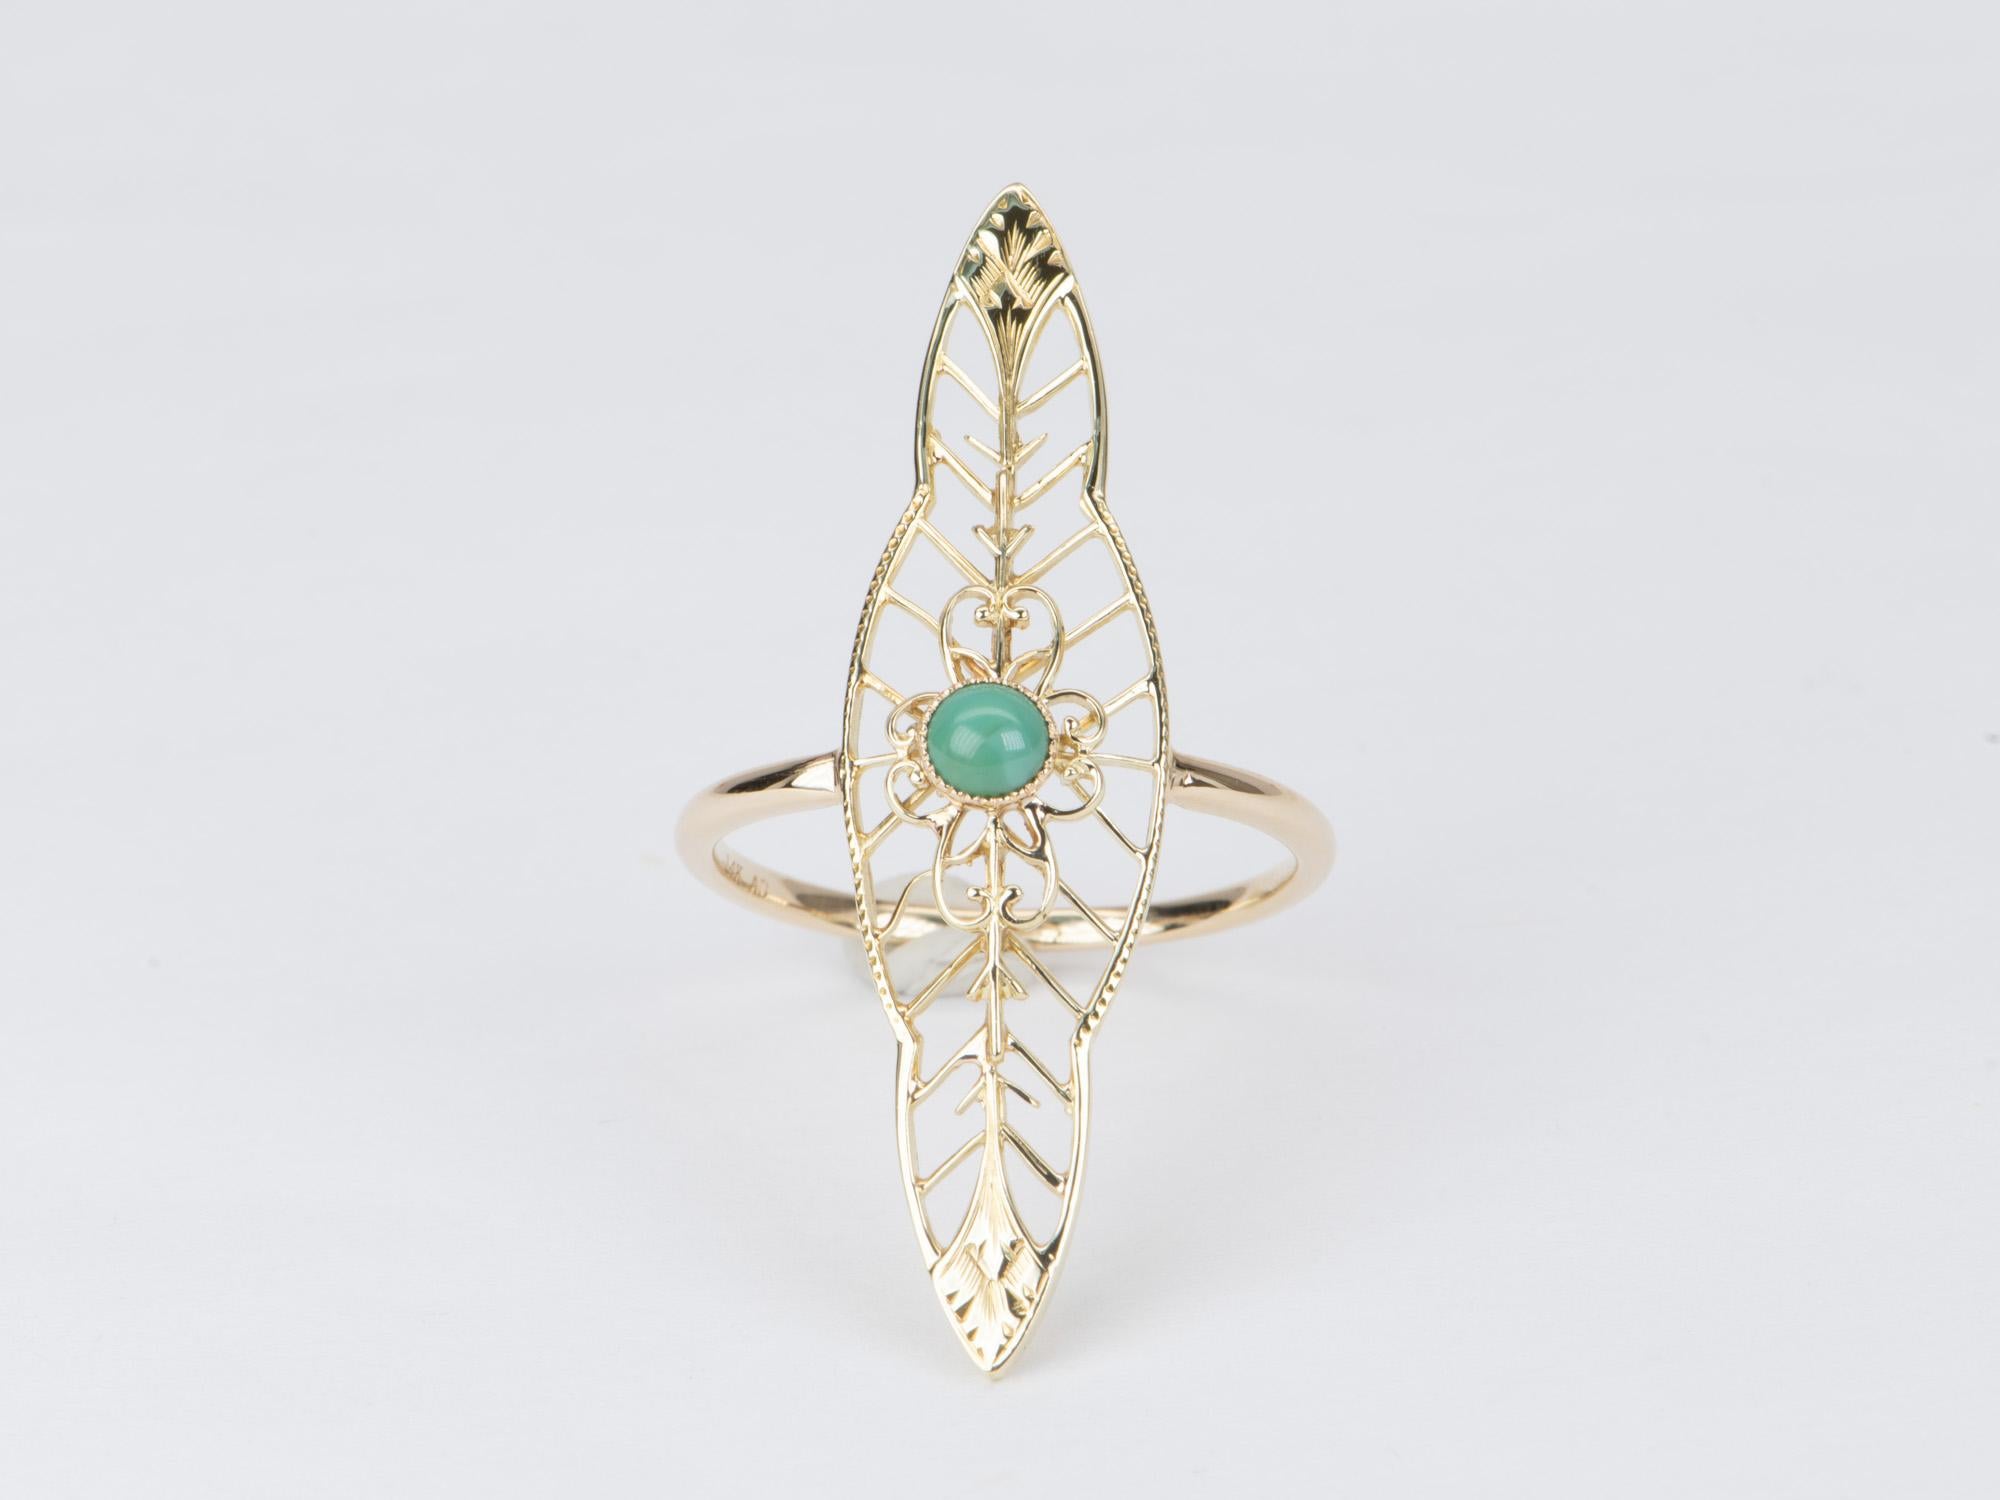 This exquisite Vintage Turquoise Pin Converted to a Navette Ring is one-of-a-kind and crafted in solid 14K gold. Its intricate filigree design and long marquise shape will flatter anyone hand. A perfect addition to any discerning jewelry